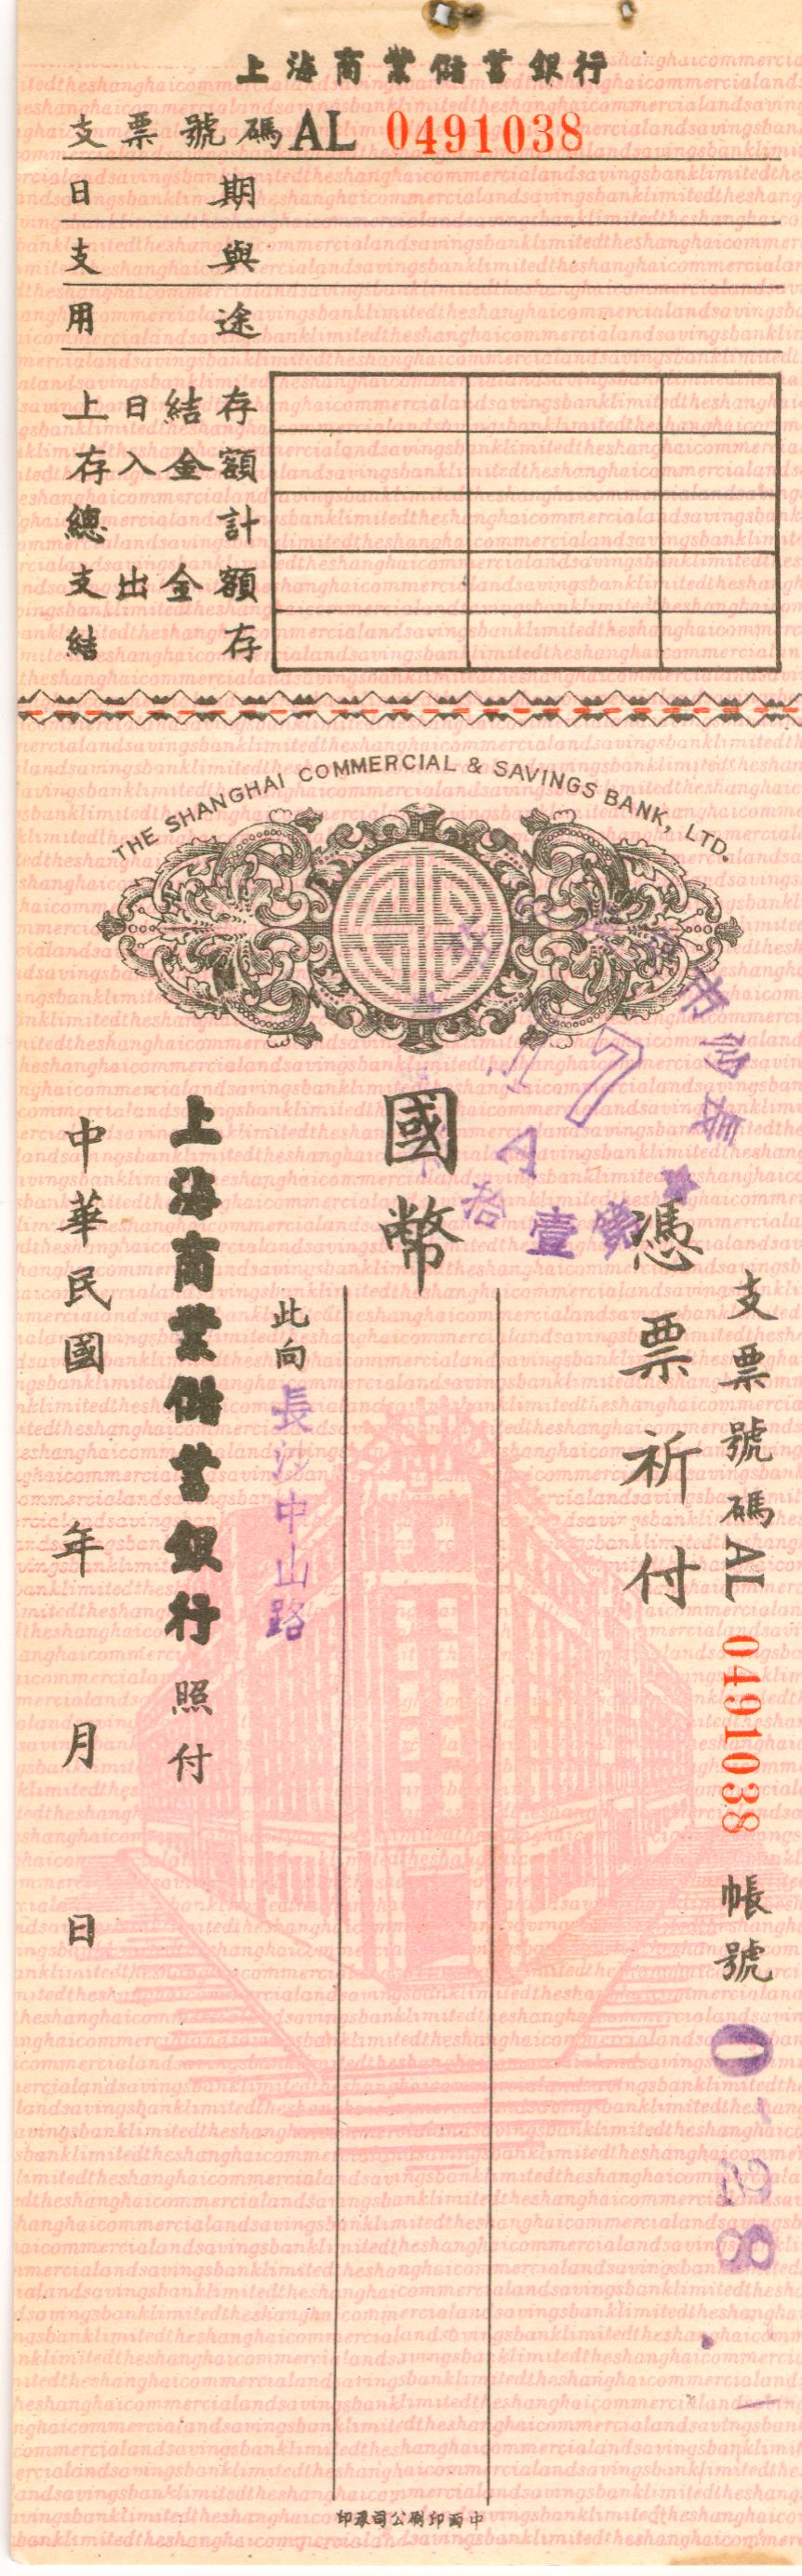 D1302, Check of Shanghai Commercial and Saving Bank, 1950's Unused Cheque